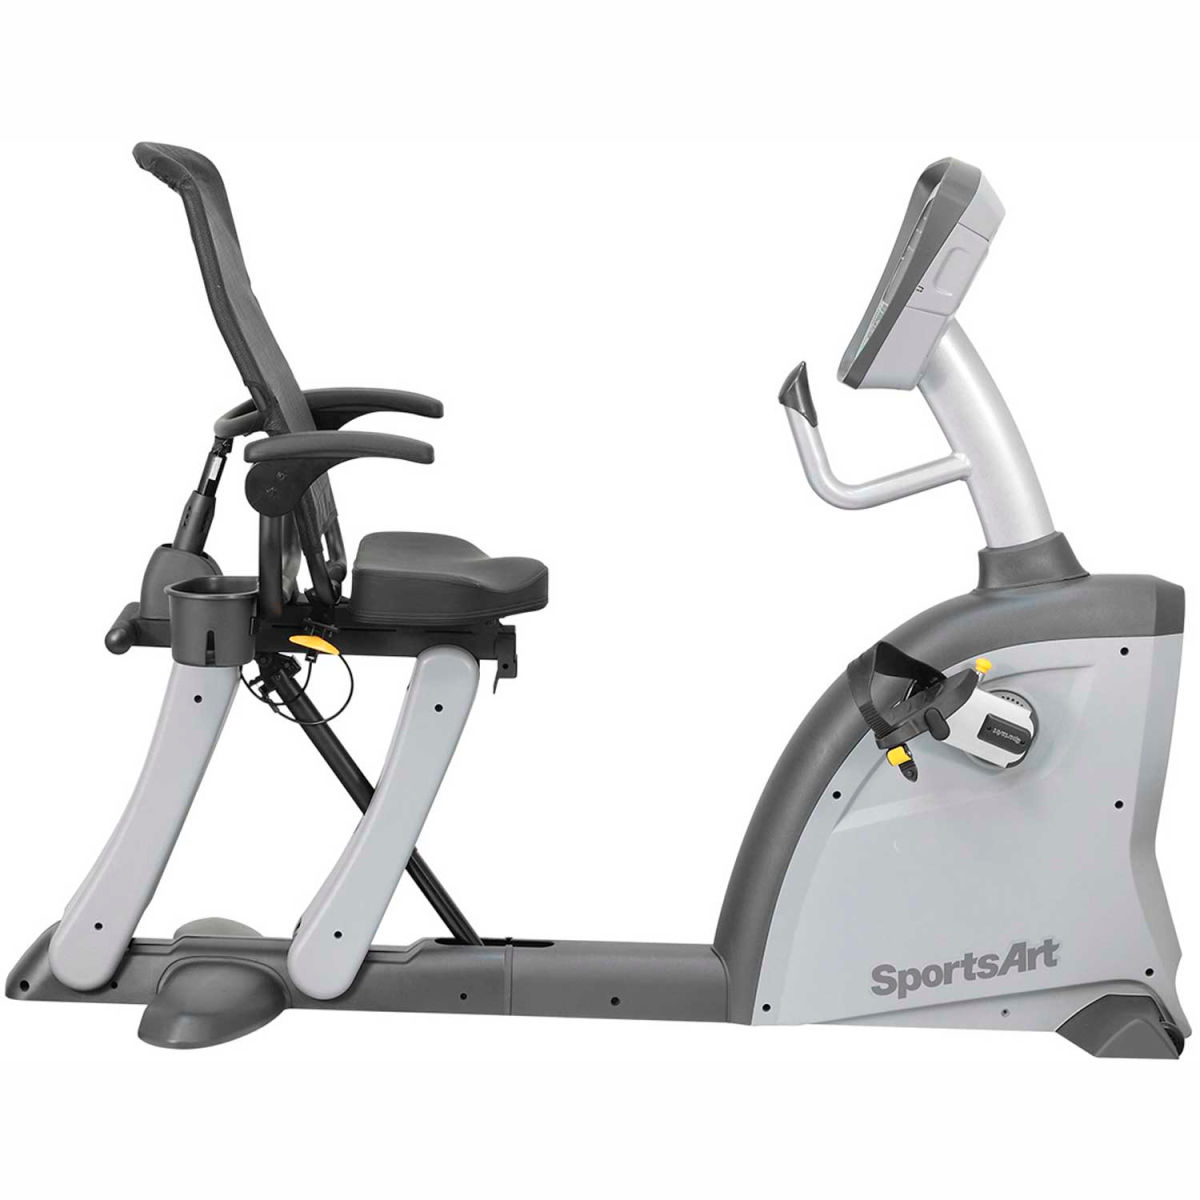 Picture of Fabrication Enterprises B2176884 SportsArt Fitness C521M Cycle - 67 x 26 x 50 in.